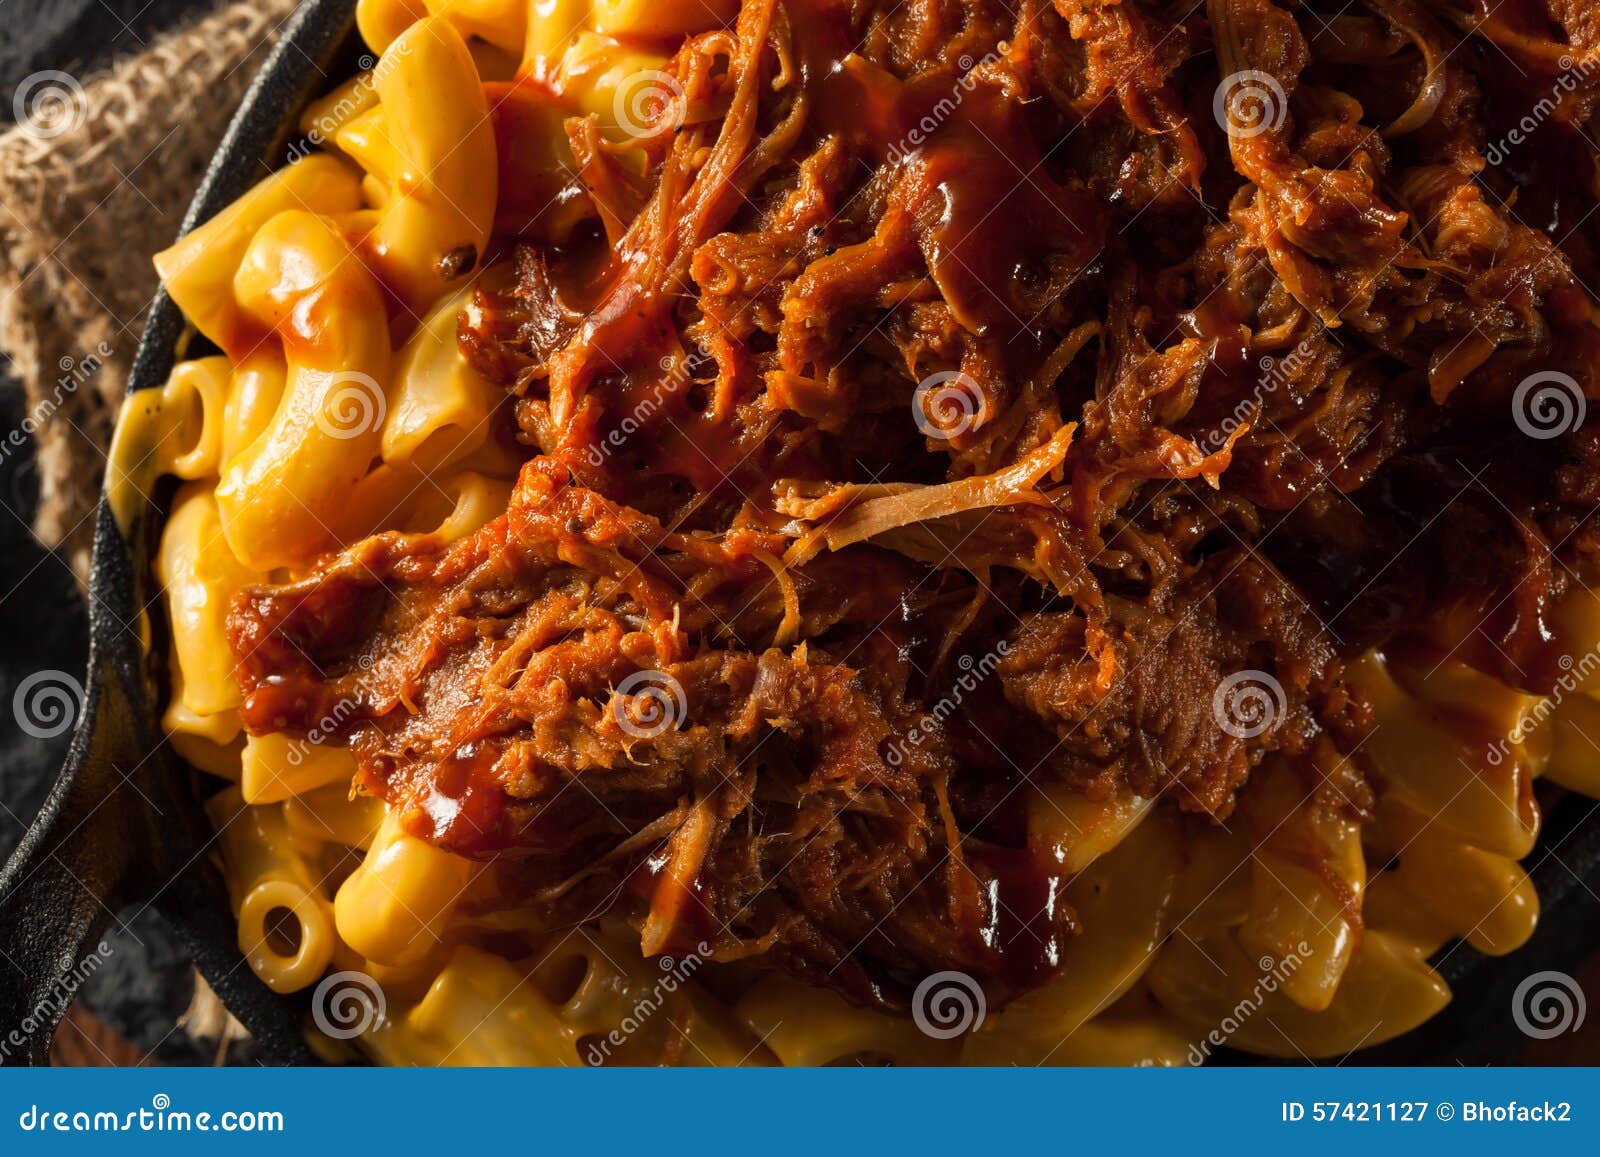 homemade bbq pulled pork mac and cheese